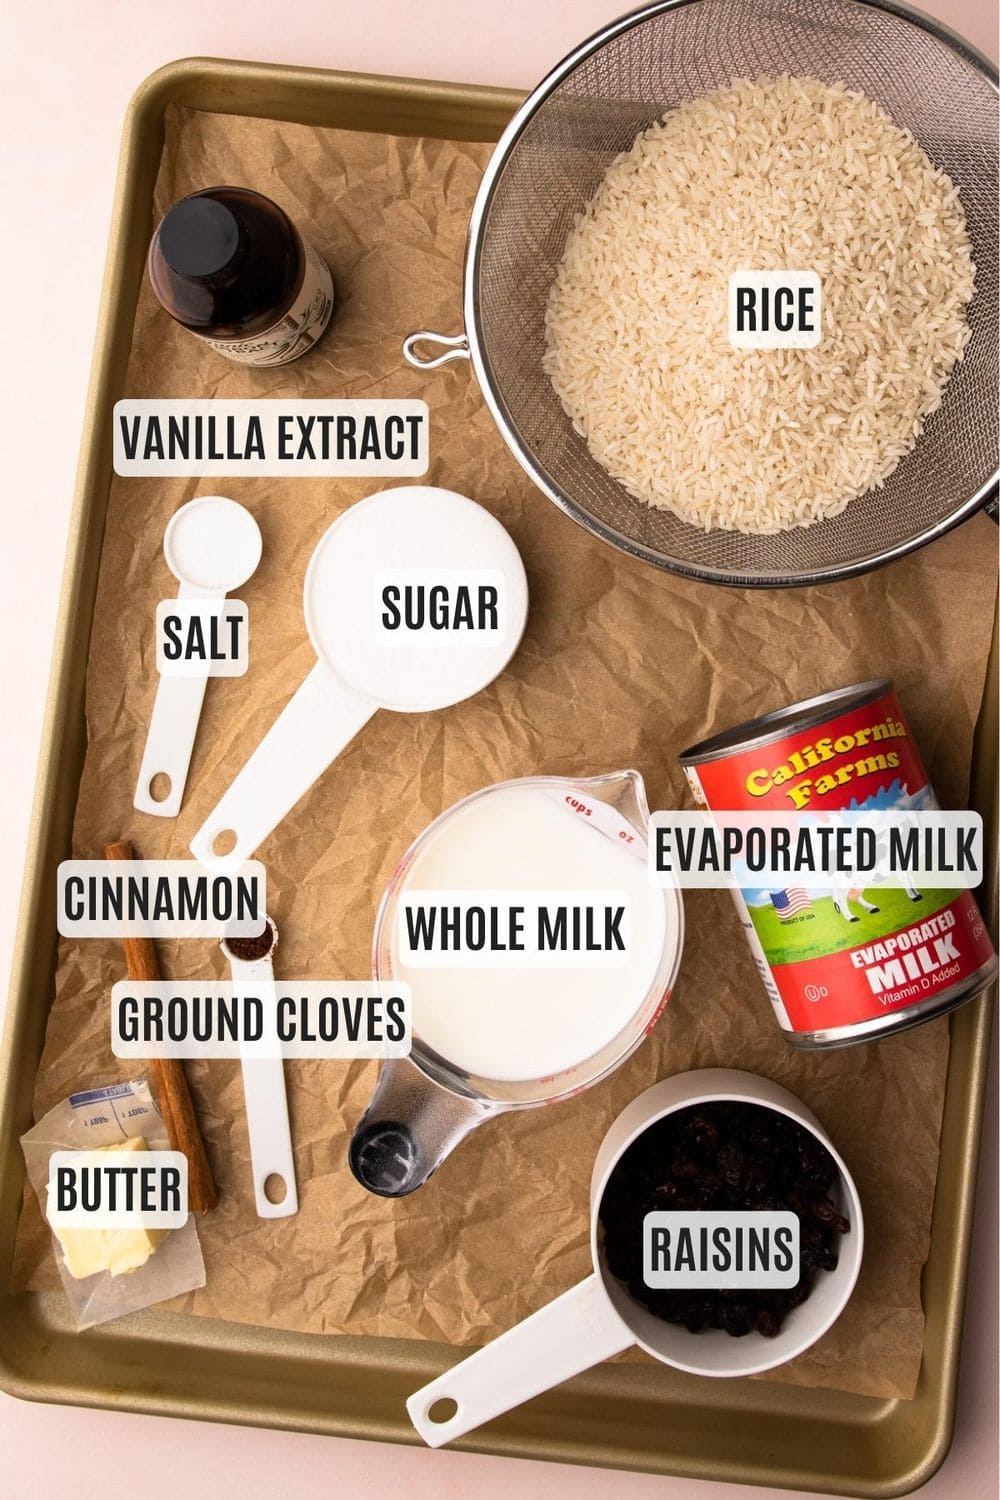 Labelled rice pudding ingredients.